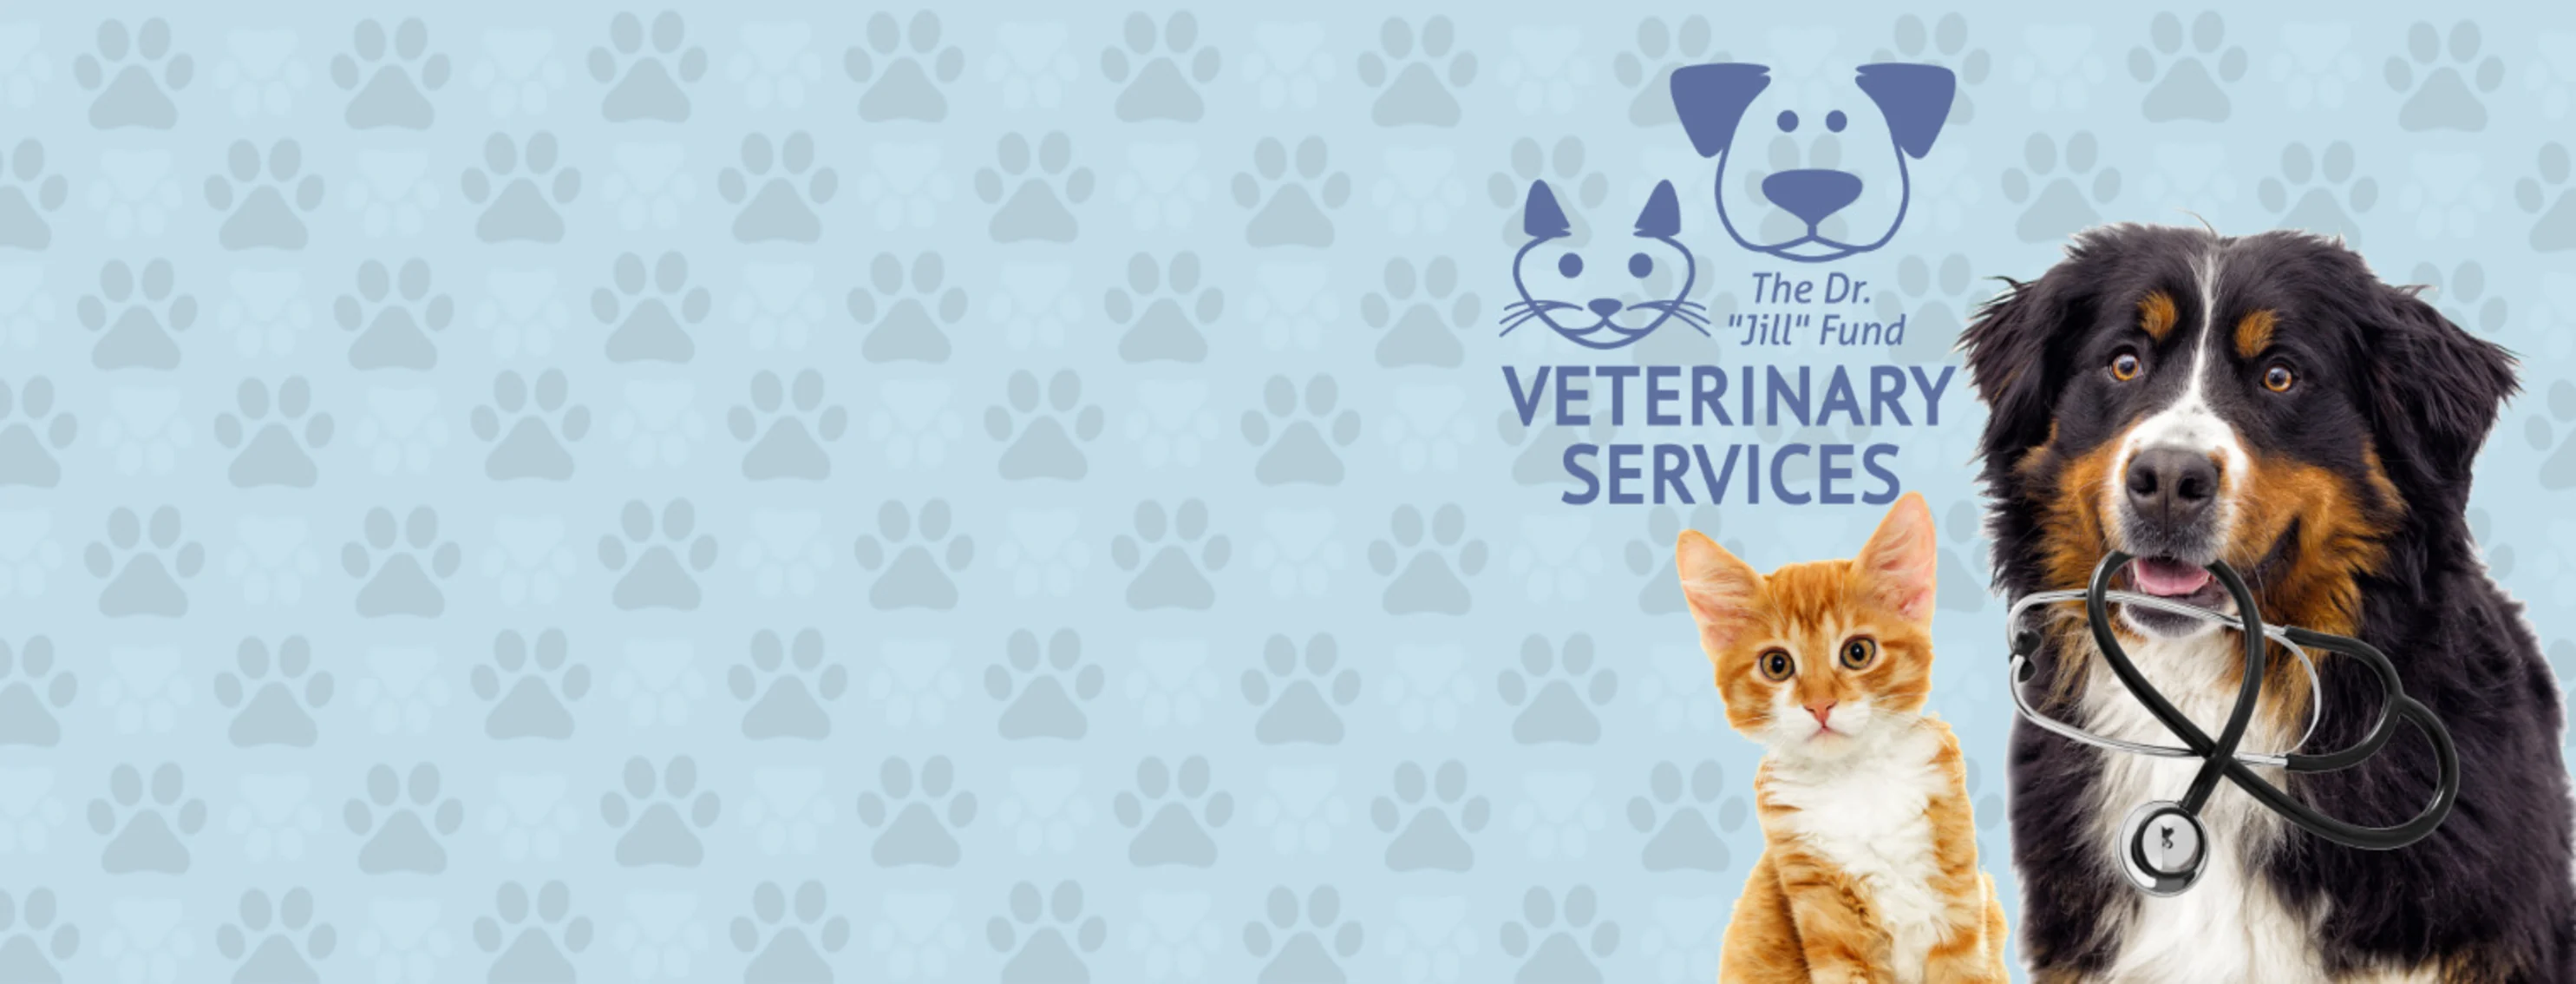 Graphic: A banner with a light blue background, medium and light grey pawprints, and a purple logo featuring a line drawing of a cat, dog, and the text "The Dr. "Jill" Fund Veterinary Services"